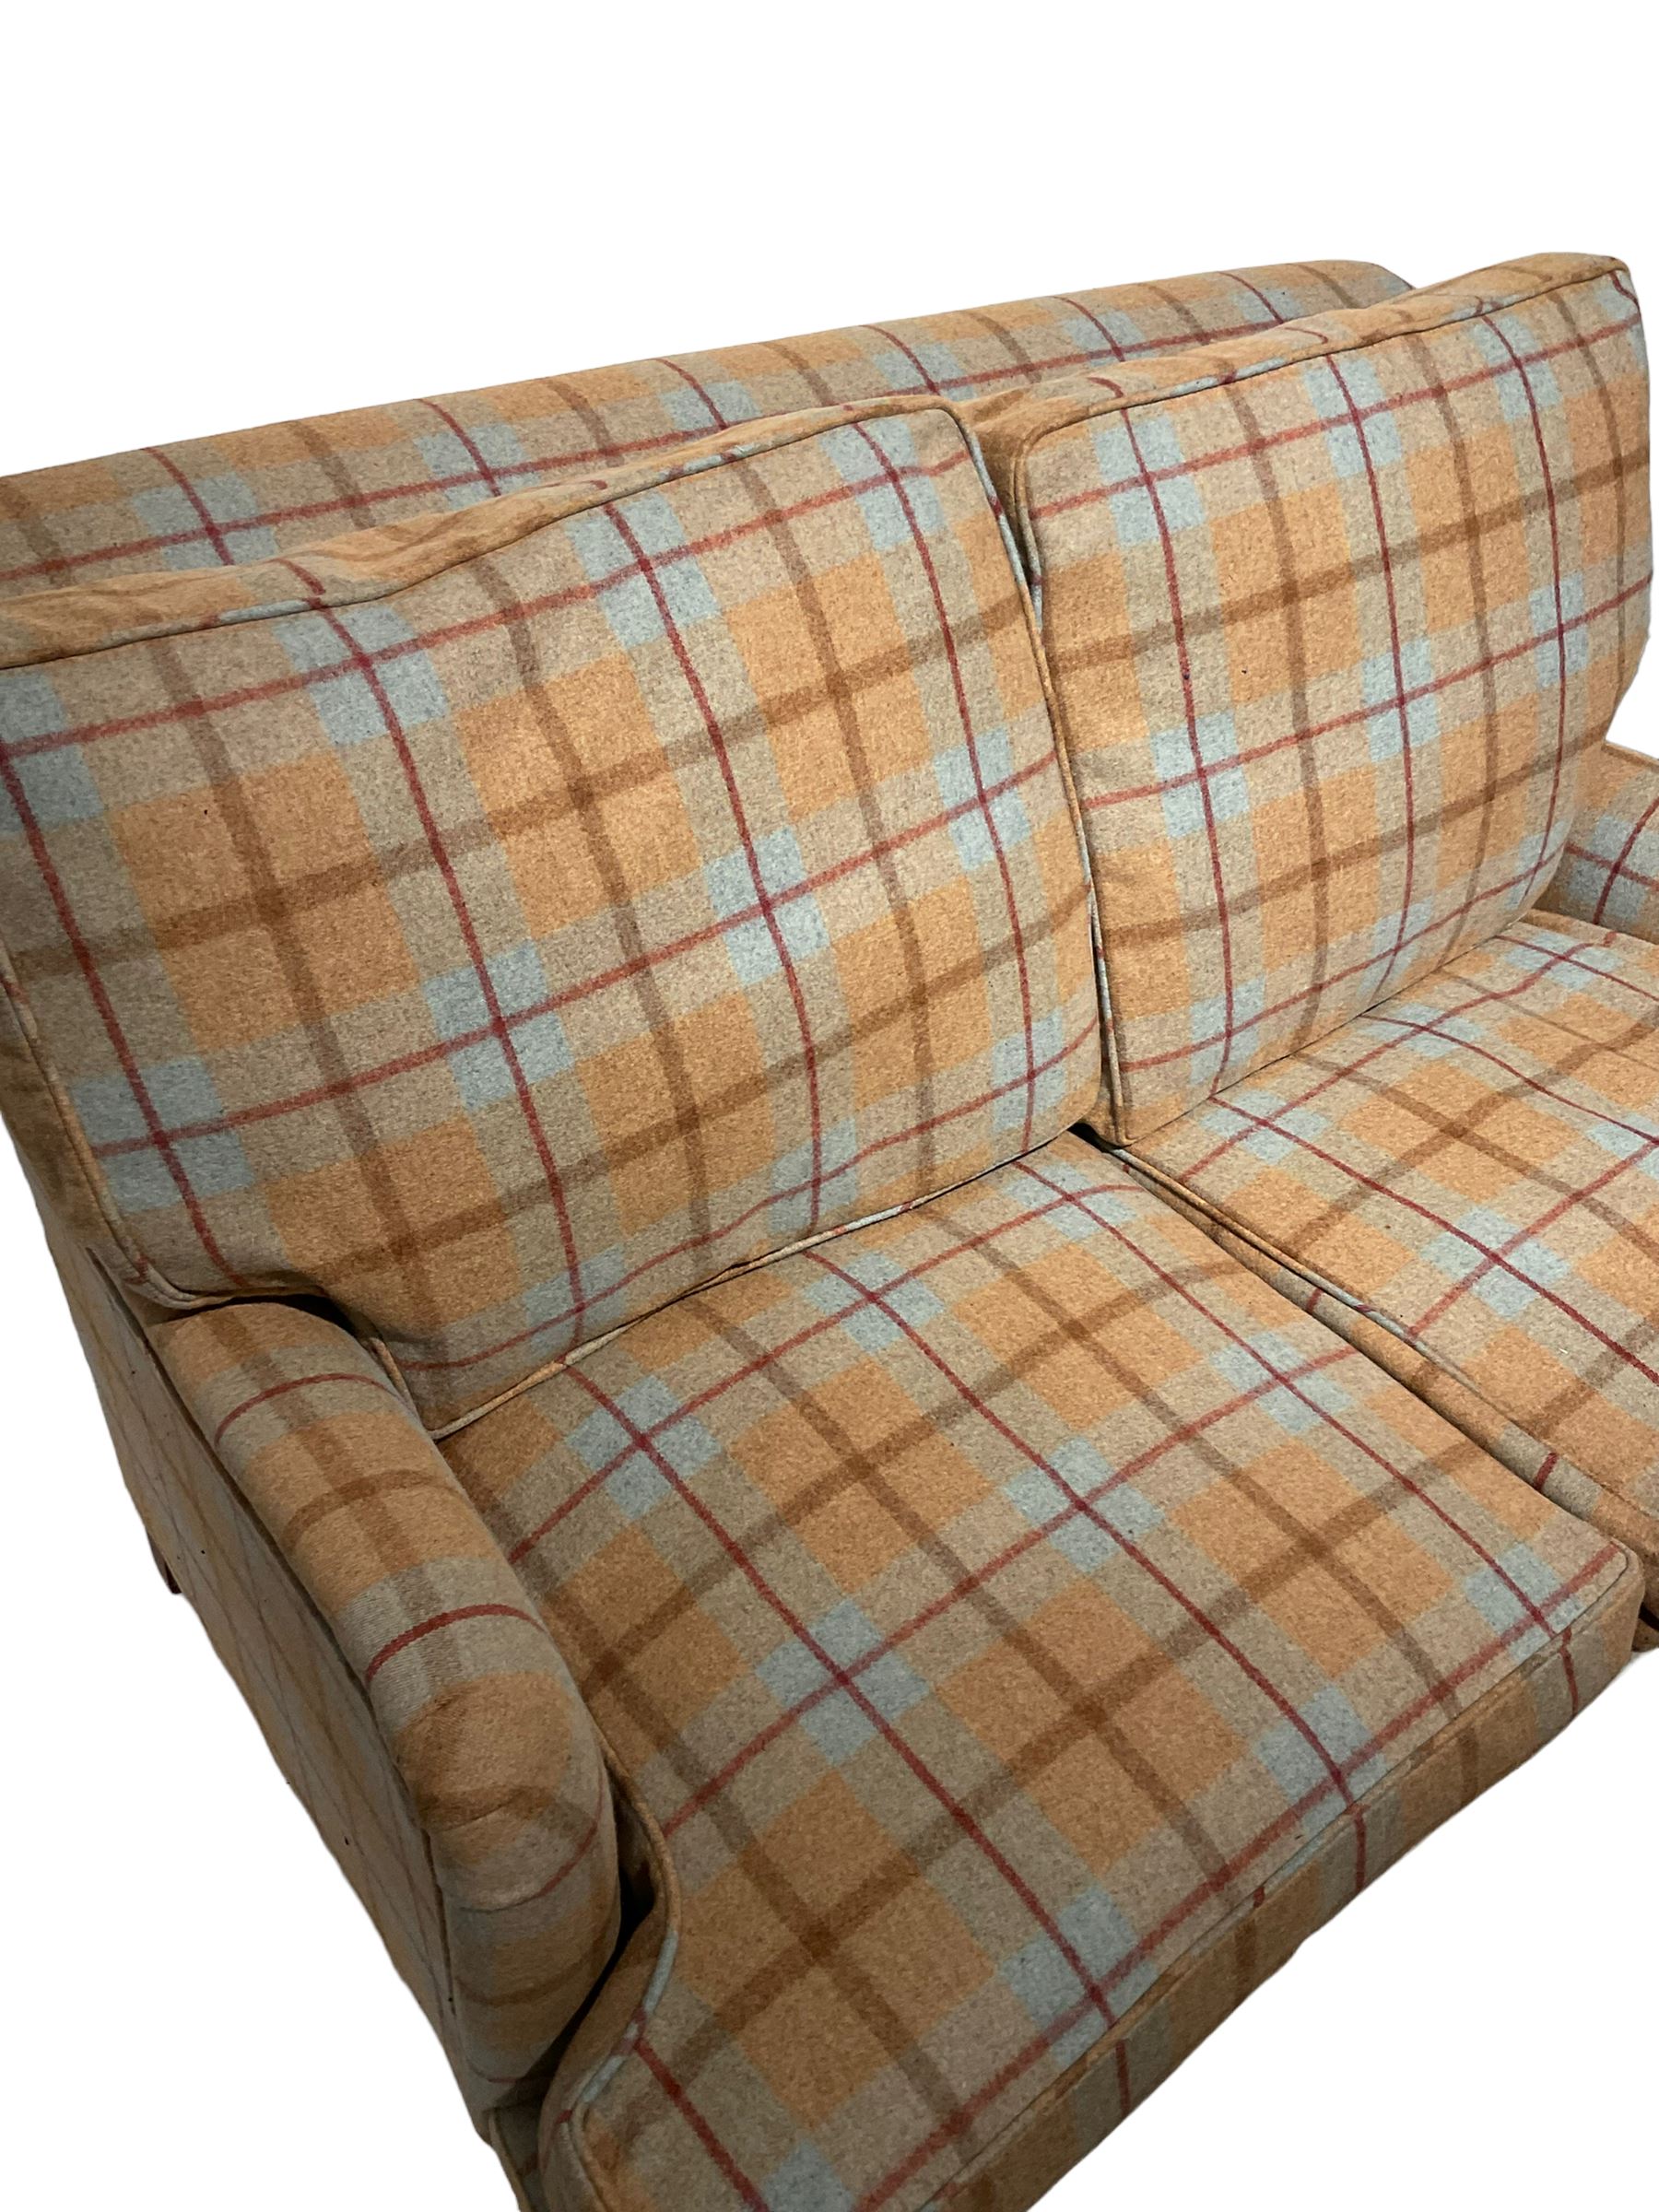 Howard design feather filled tartan pattern two seat sofa on Victorian style turned legs with castor - Image 4 of 5